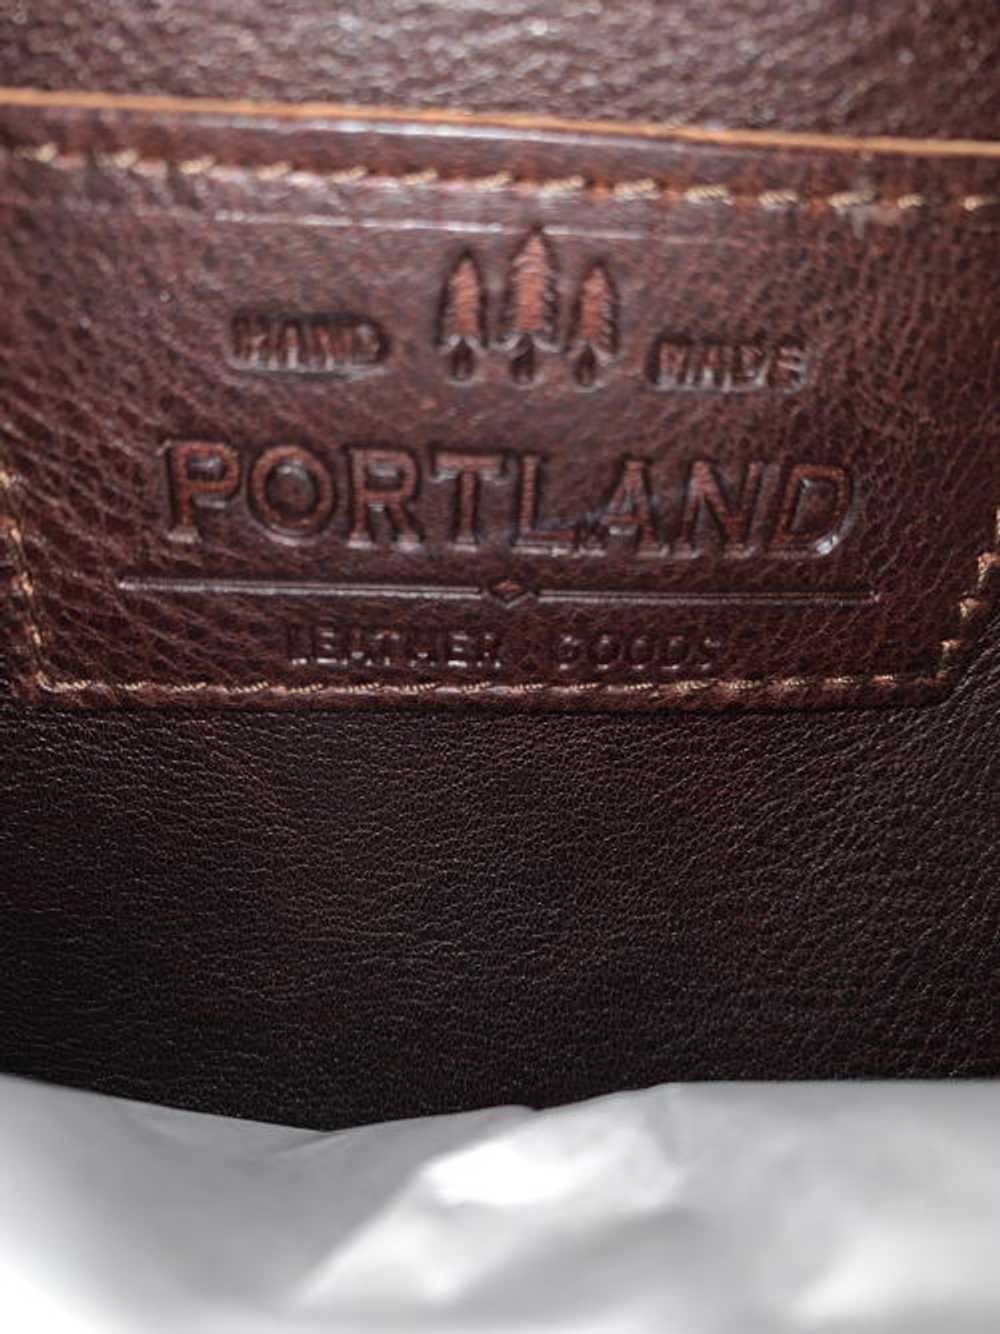 Portland Leather 'Almost Perfect' Laptop Backpack - image 5